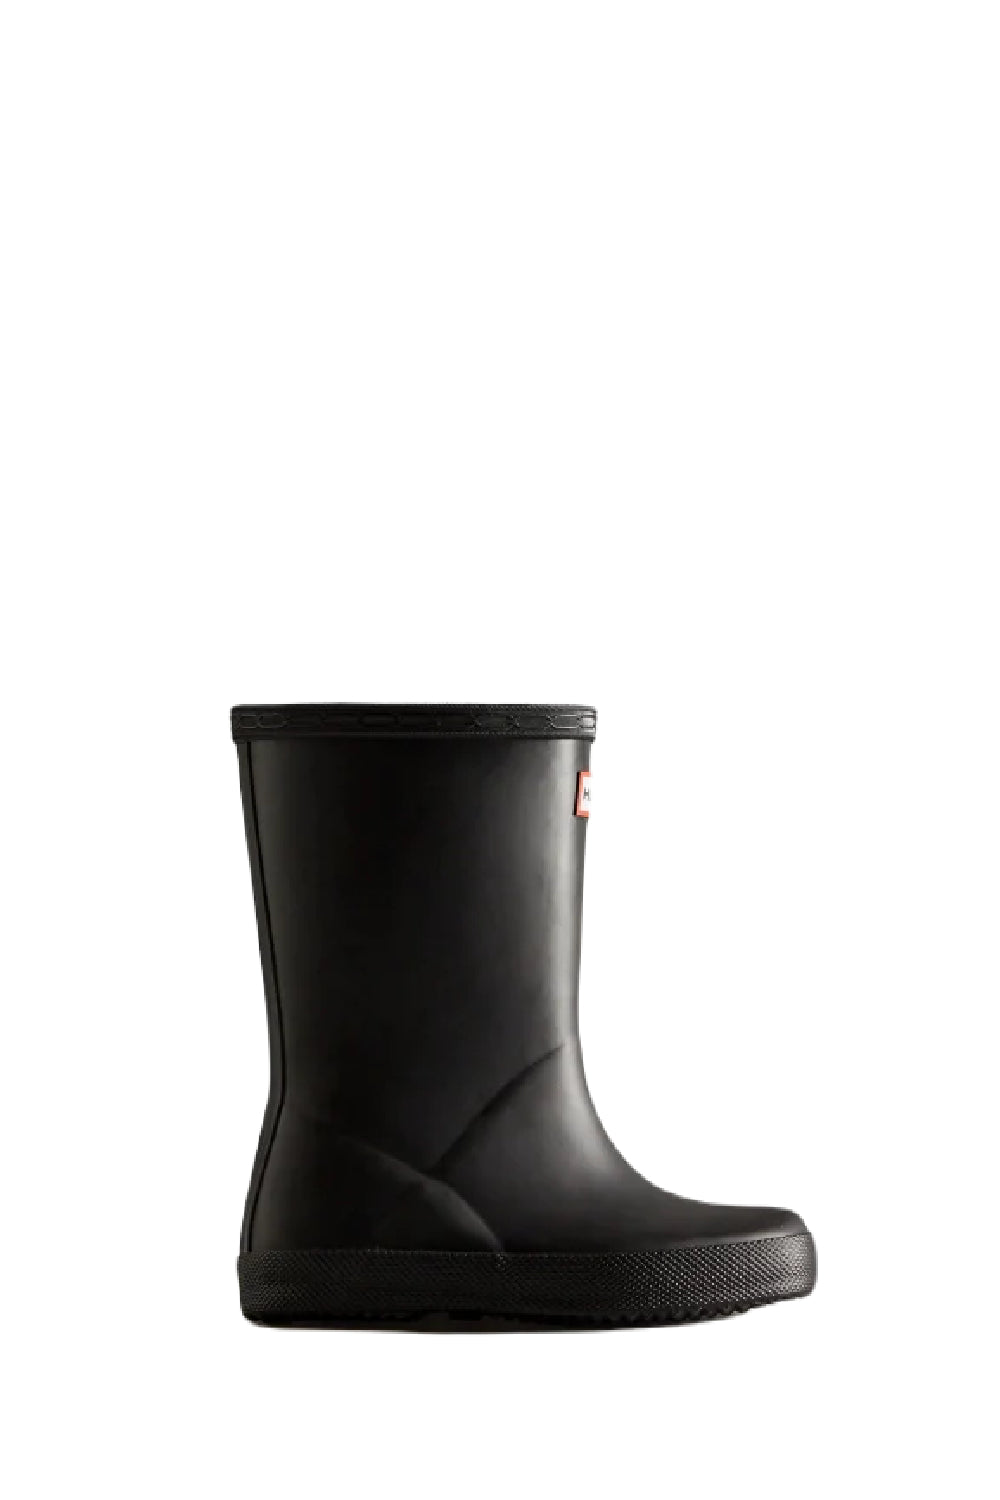 Hunter Kids First Classic Wellington Boots in Black